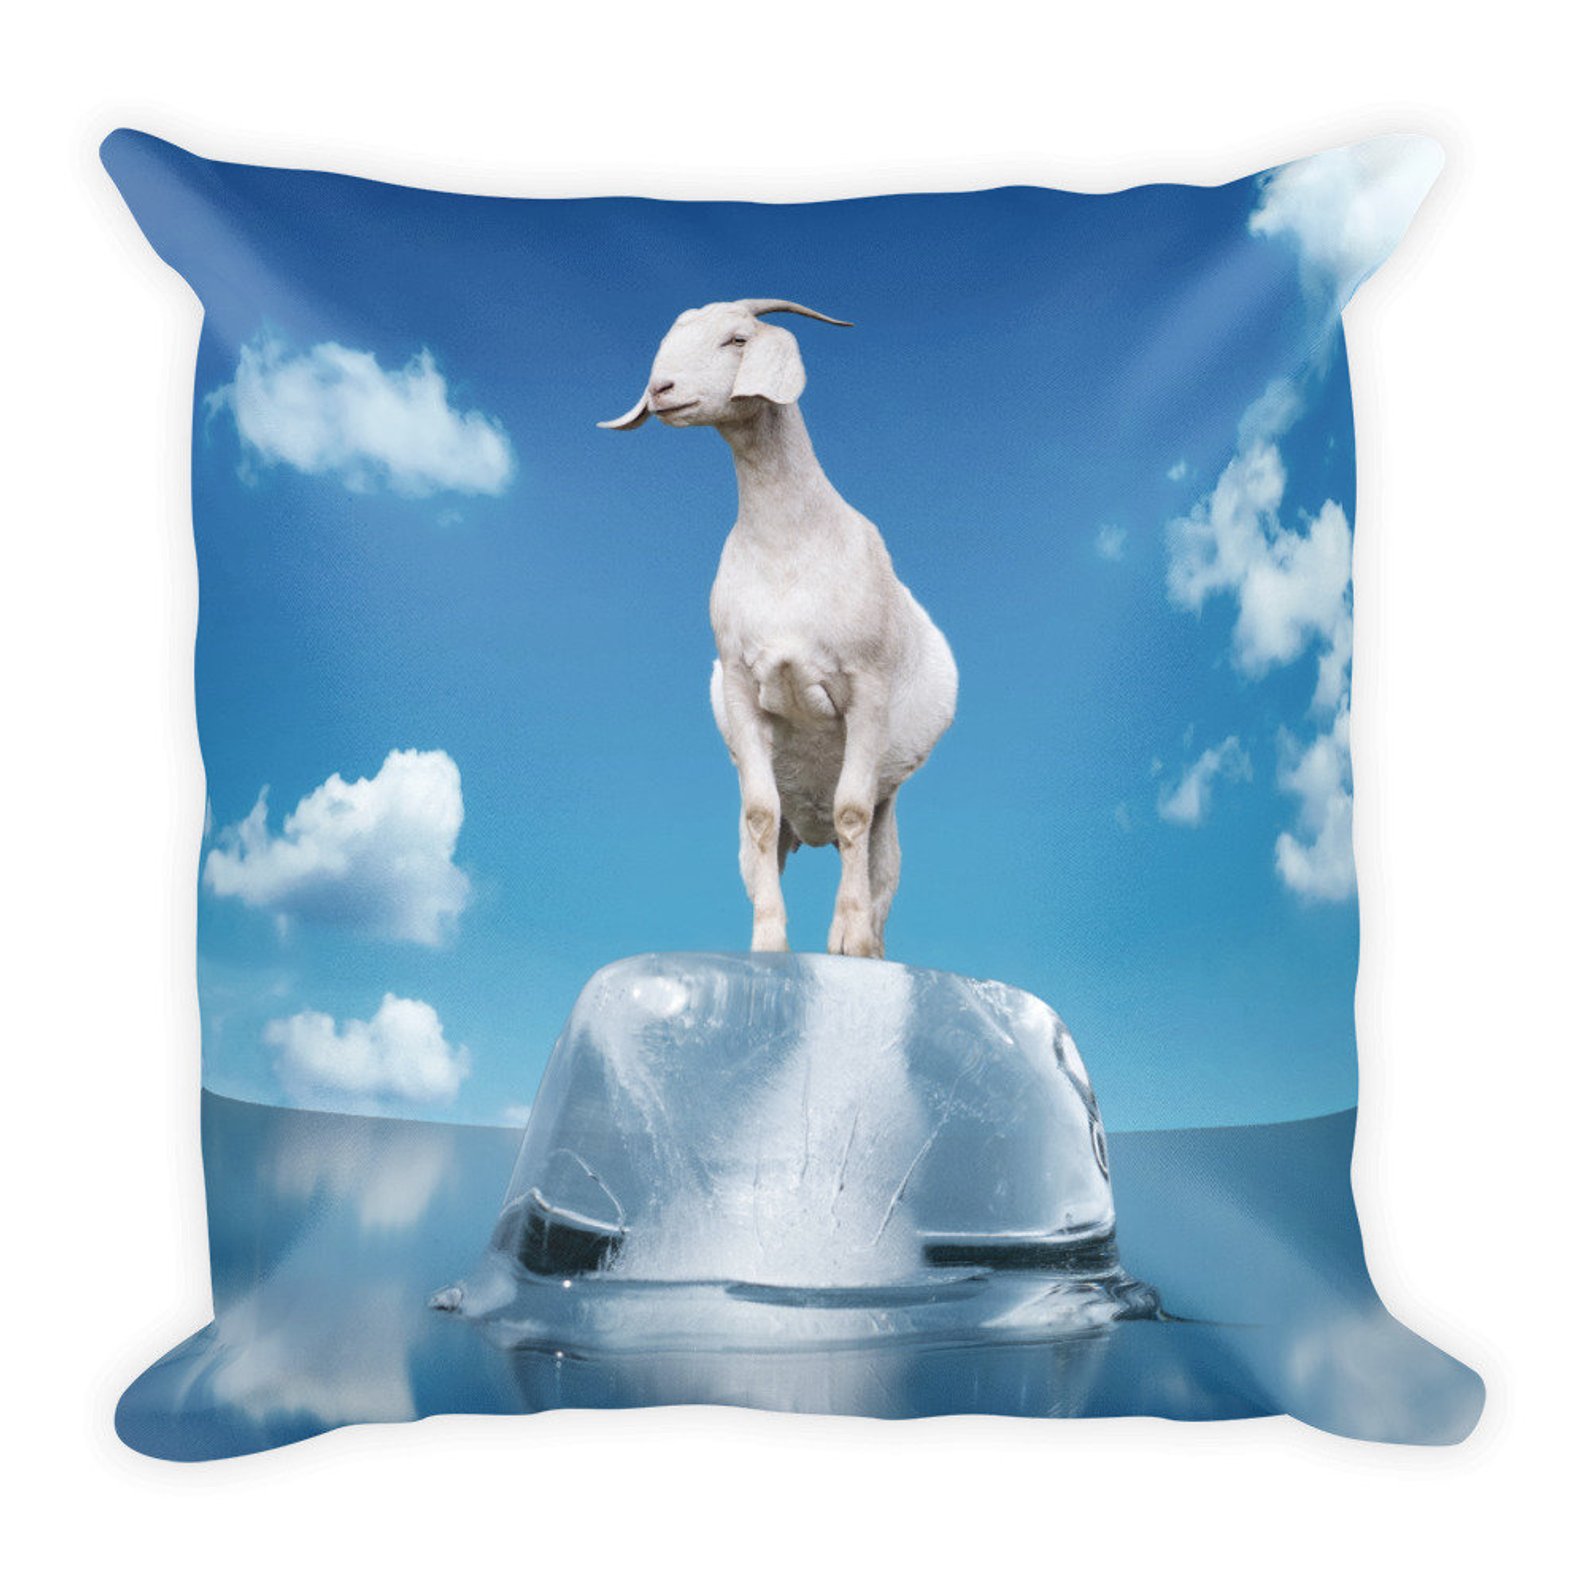 Goat Pillow 18" x 18" Perpetual Groove